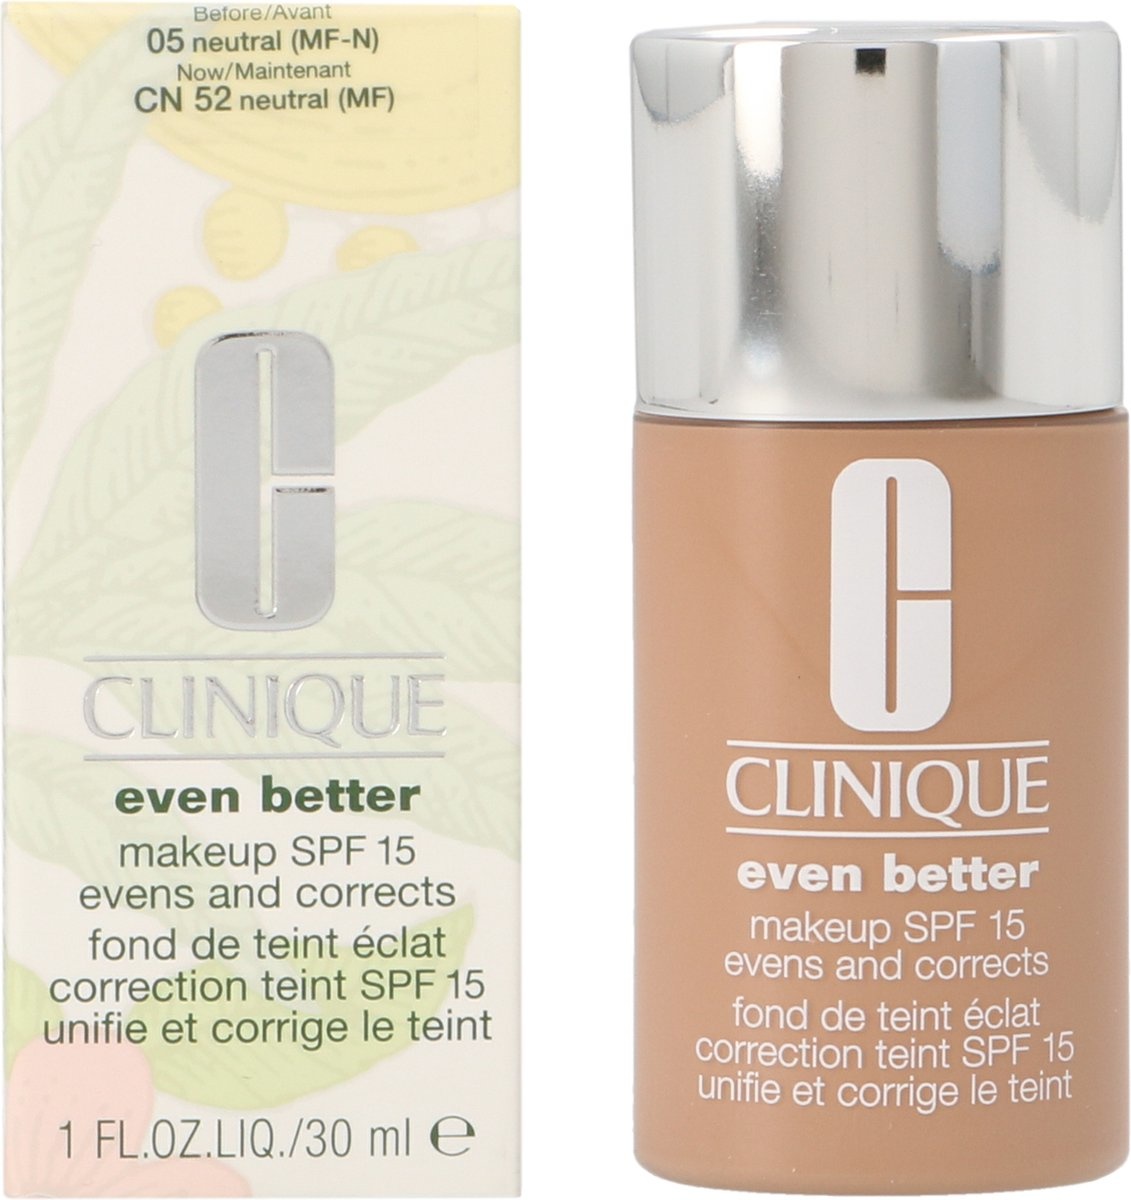 Clinique Even Better Foundation - CN 52 Neutral - Packaging damaged